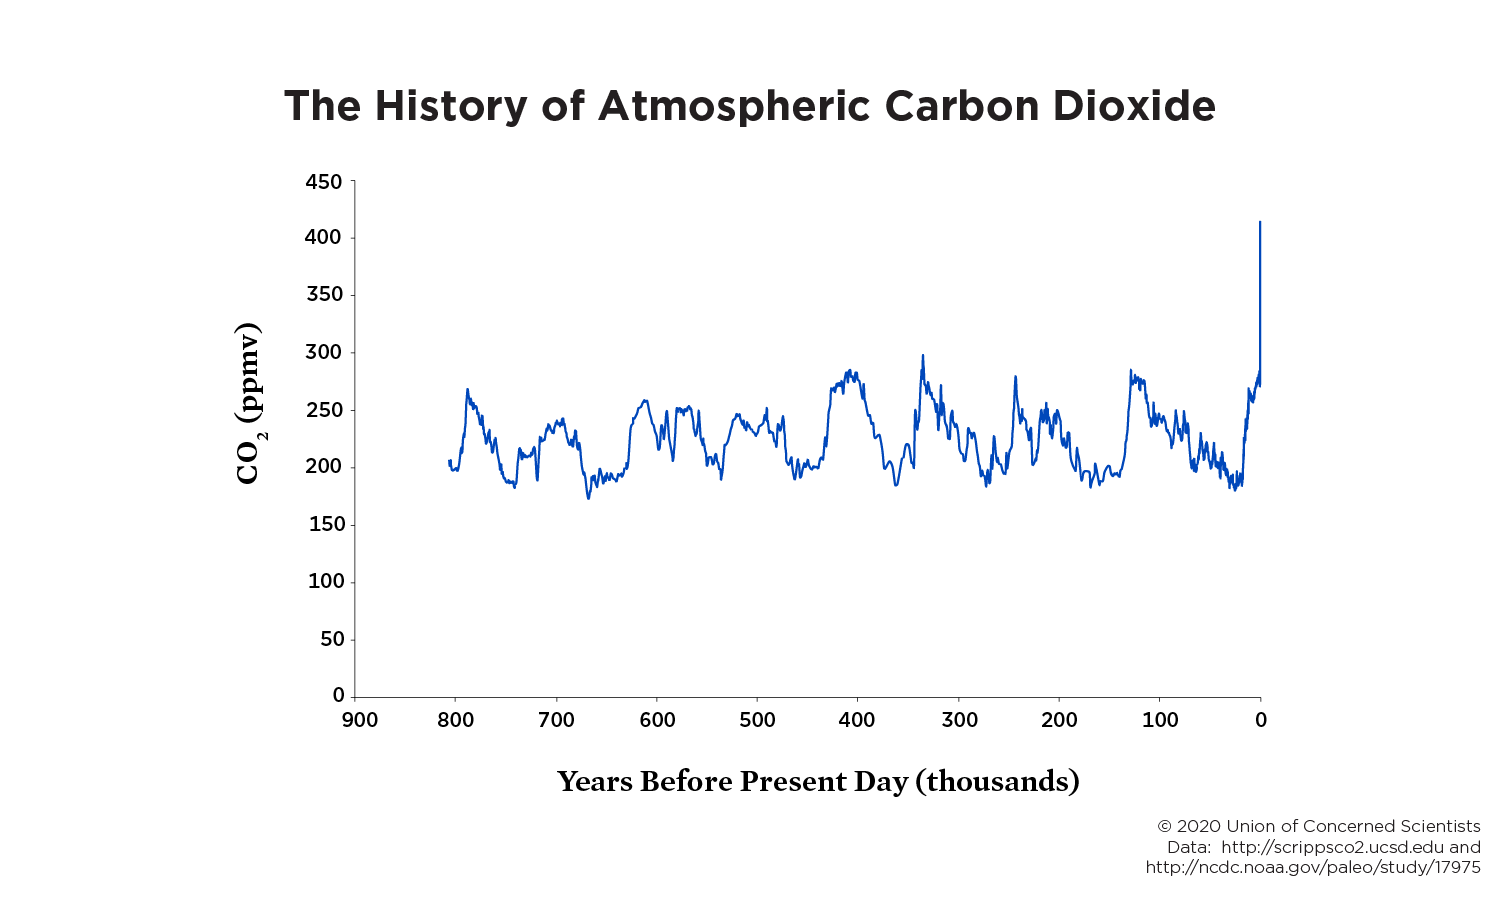 A line chart showing co2 over time. It spikes at the end.